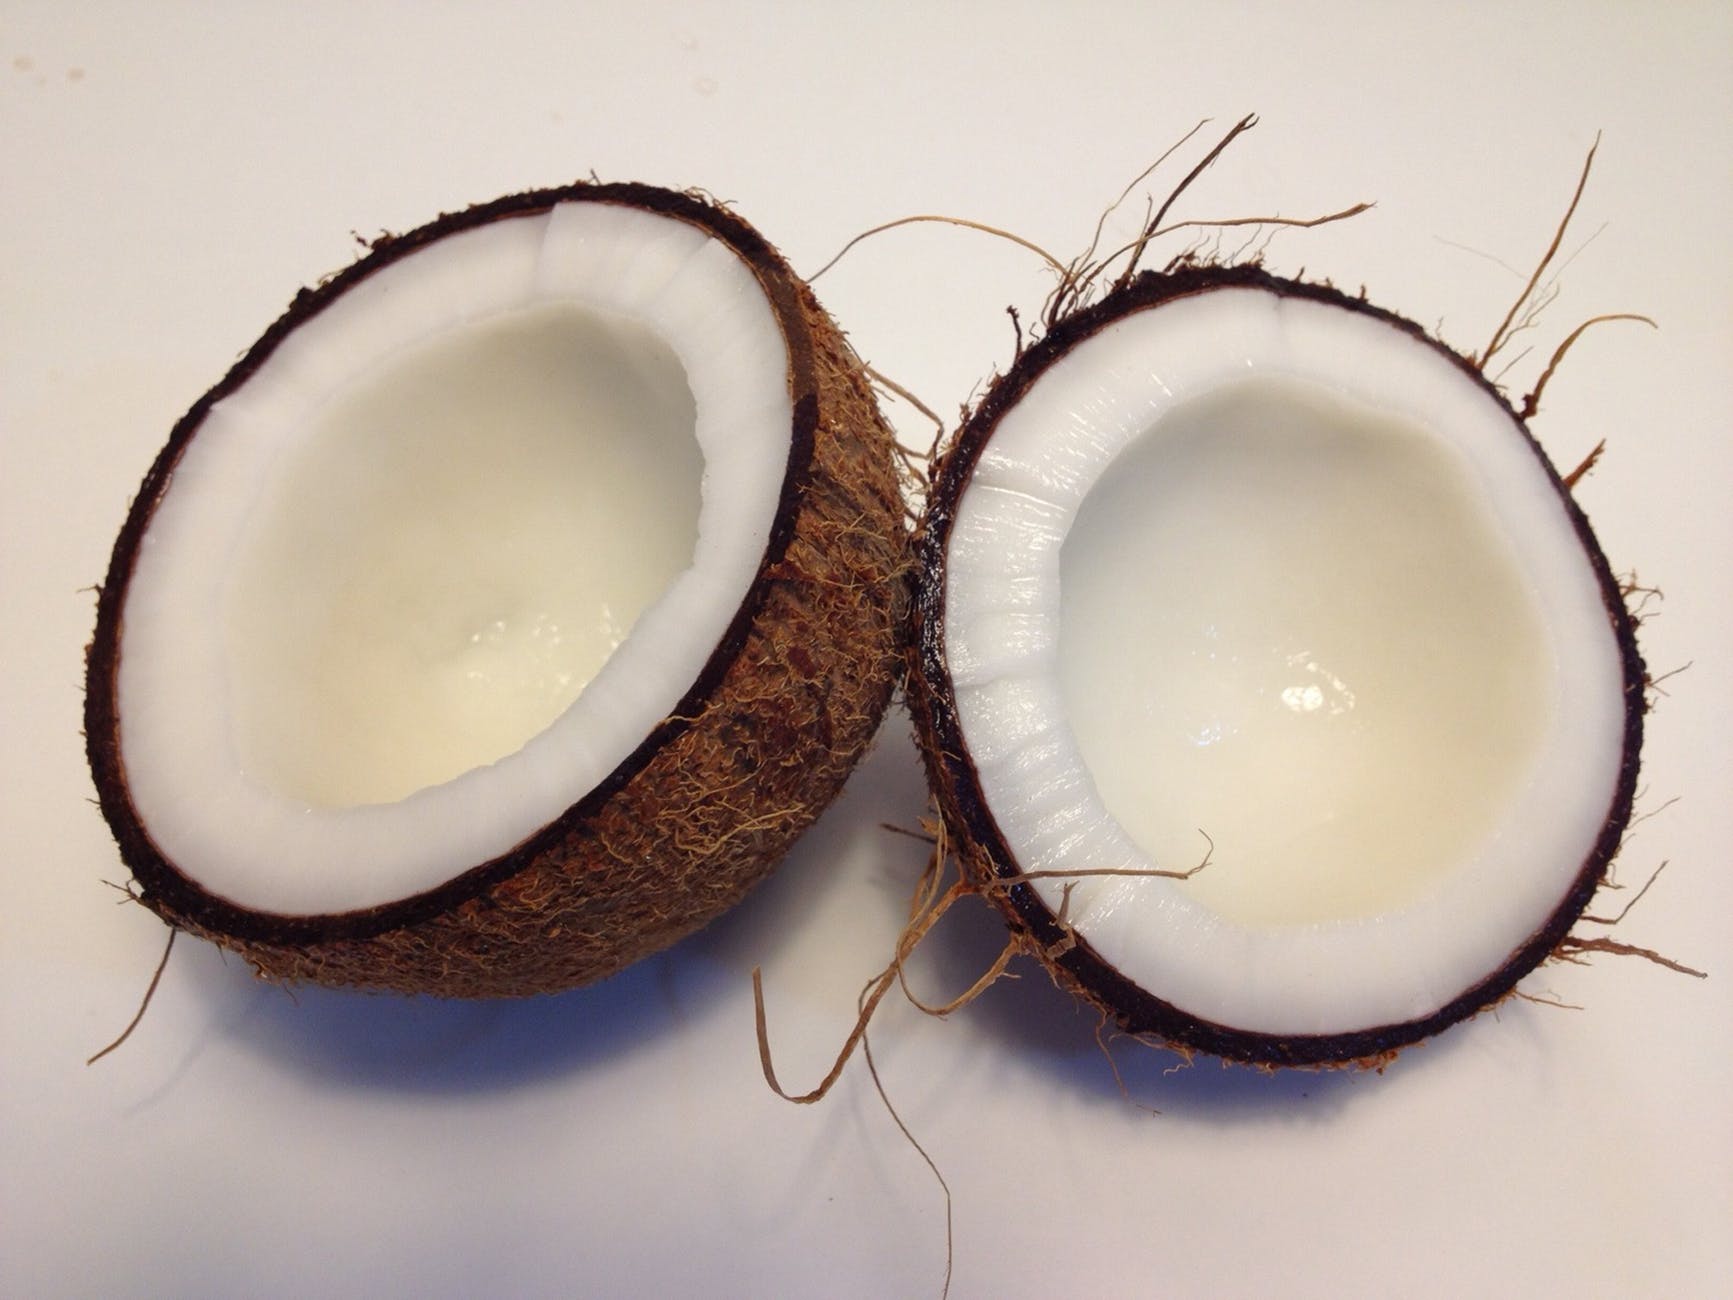 coconut fruit sliced into two